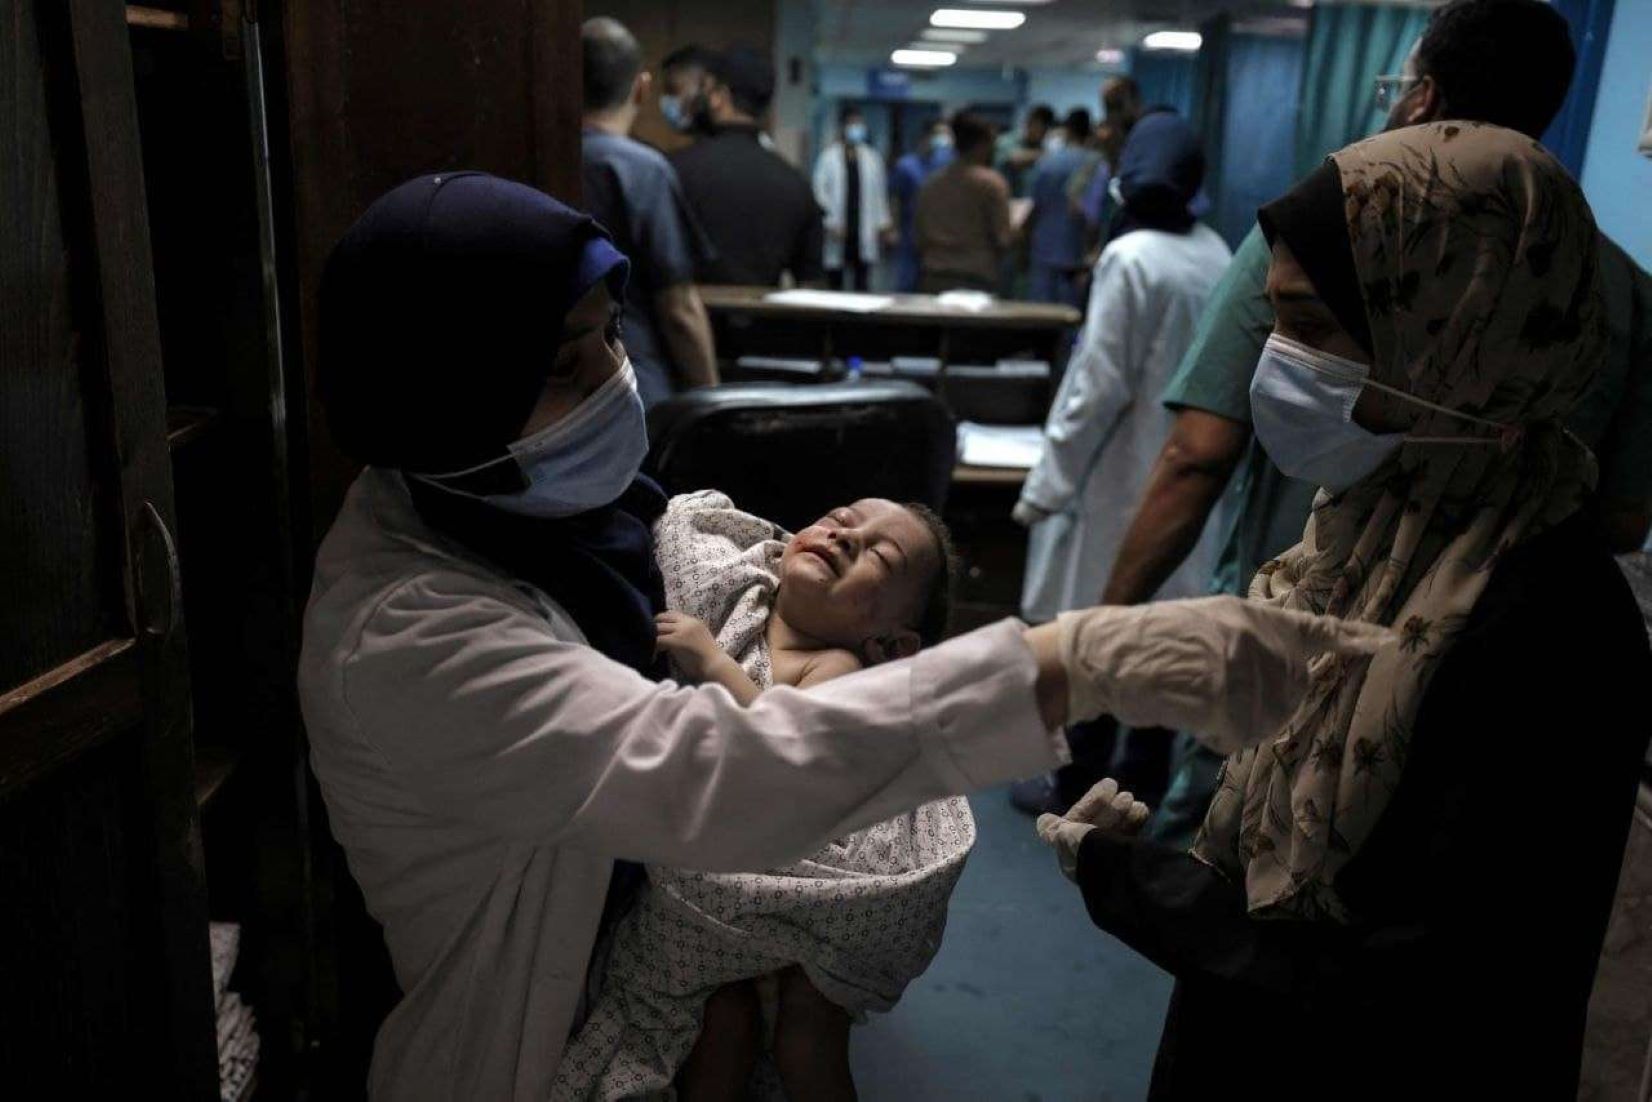 Roundup: Collapse Of Healthcare System Adds To Gaza’s Suffering